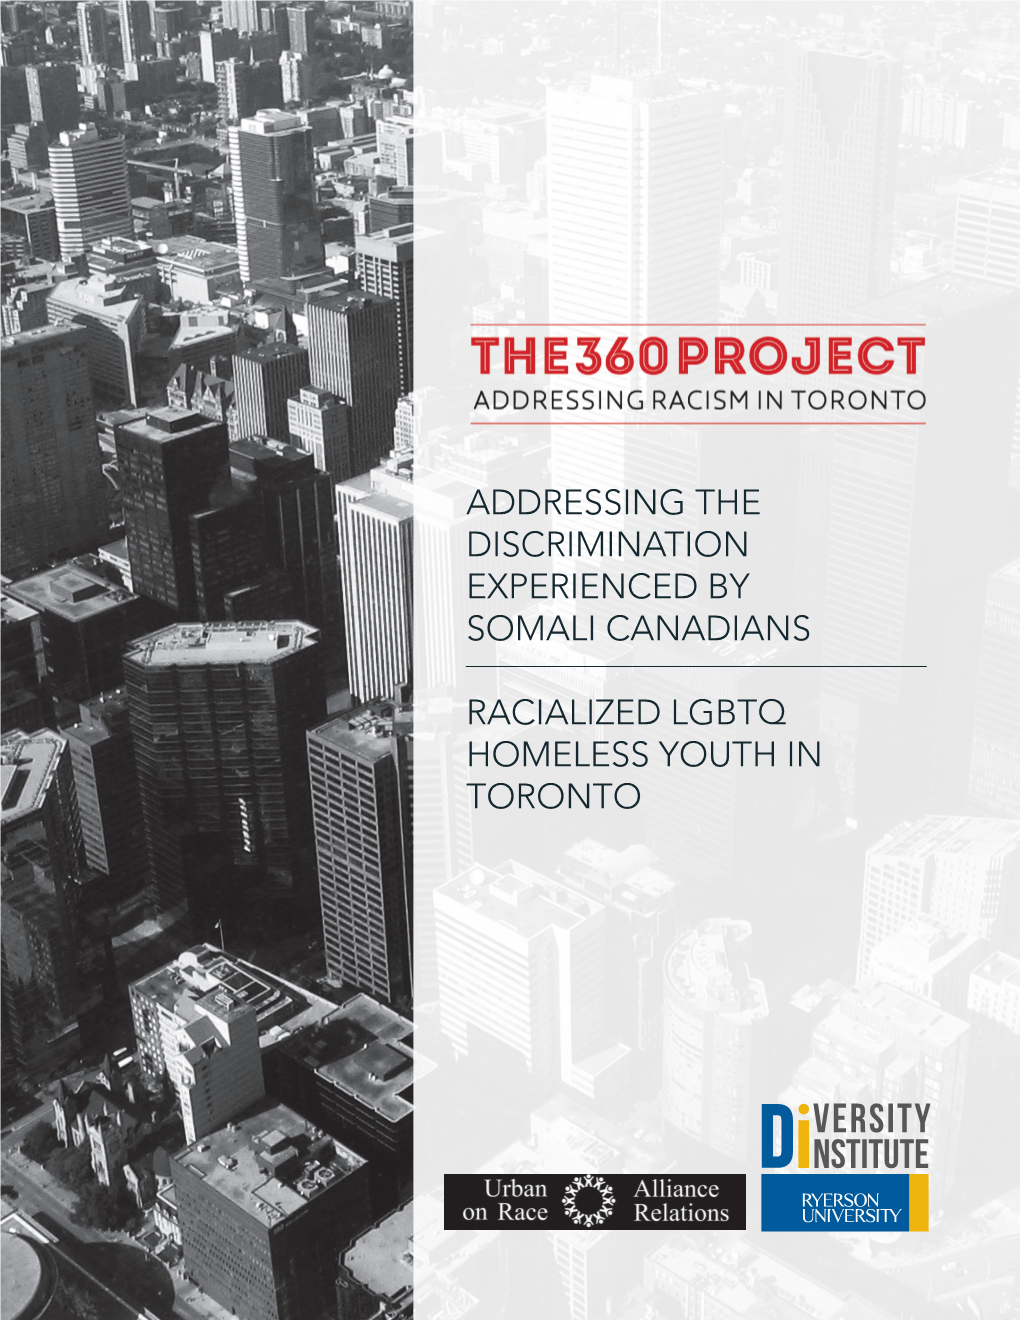 Addressing the Discrimination Experienced by Somali Canadians